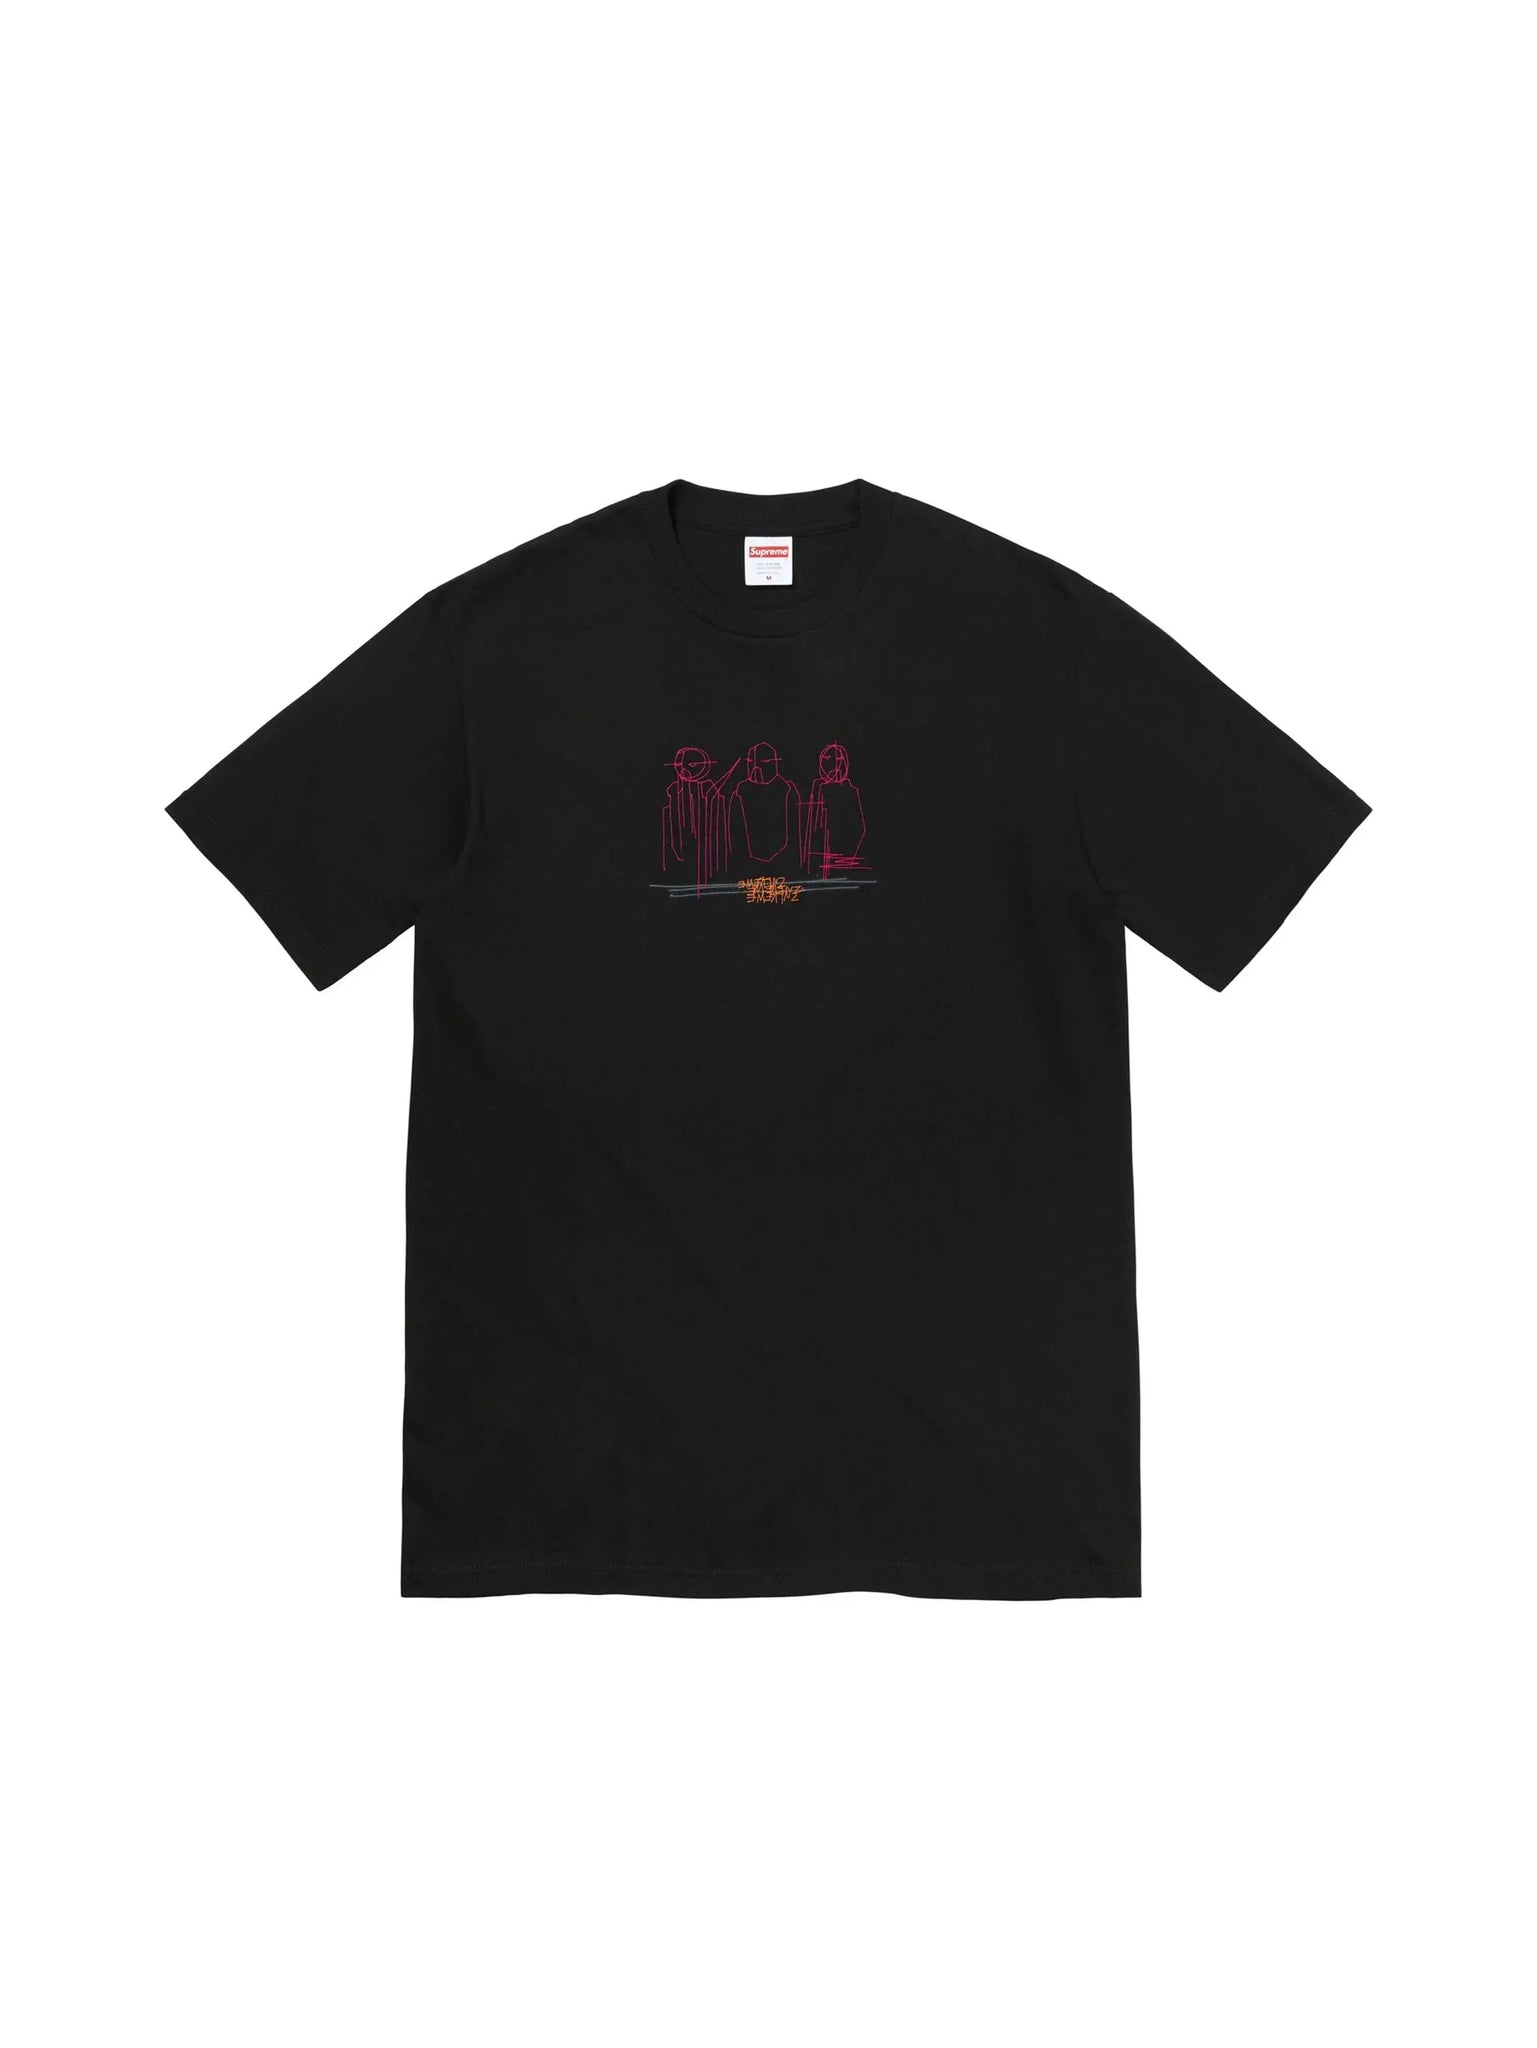 Supreme Three Kings Tee Black in Auckland, New Zealand - Shop name